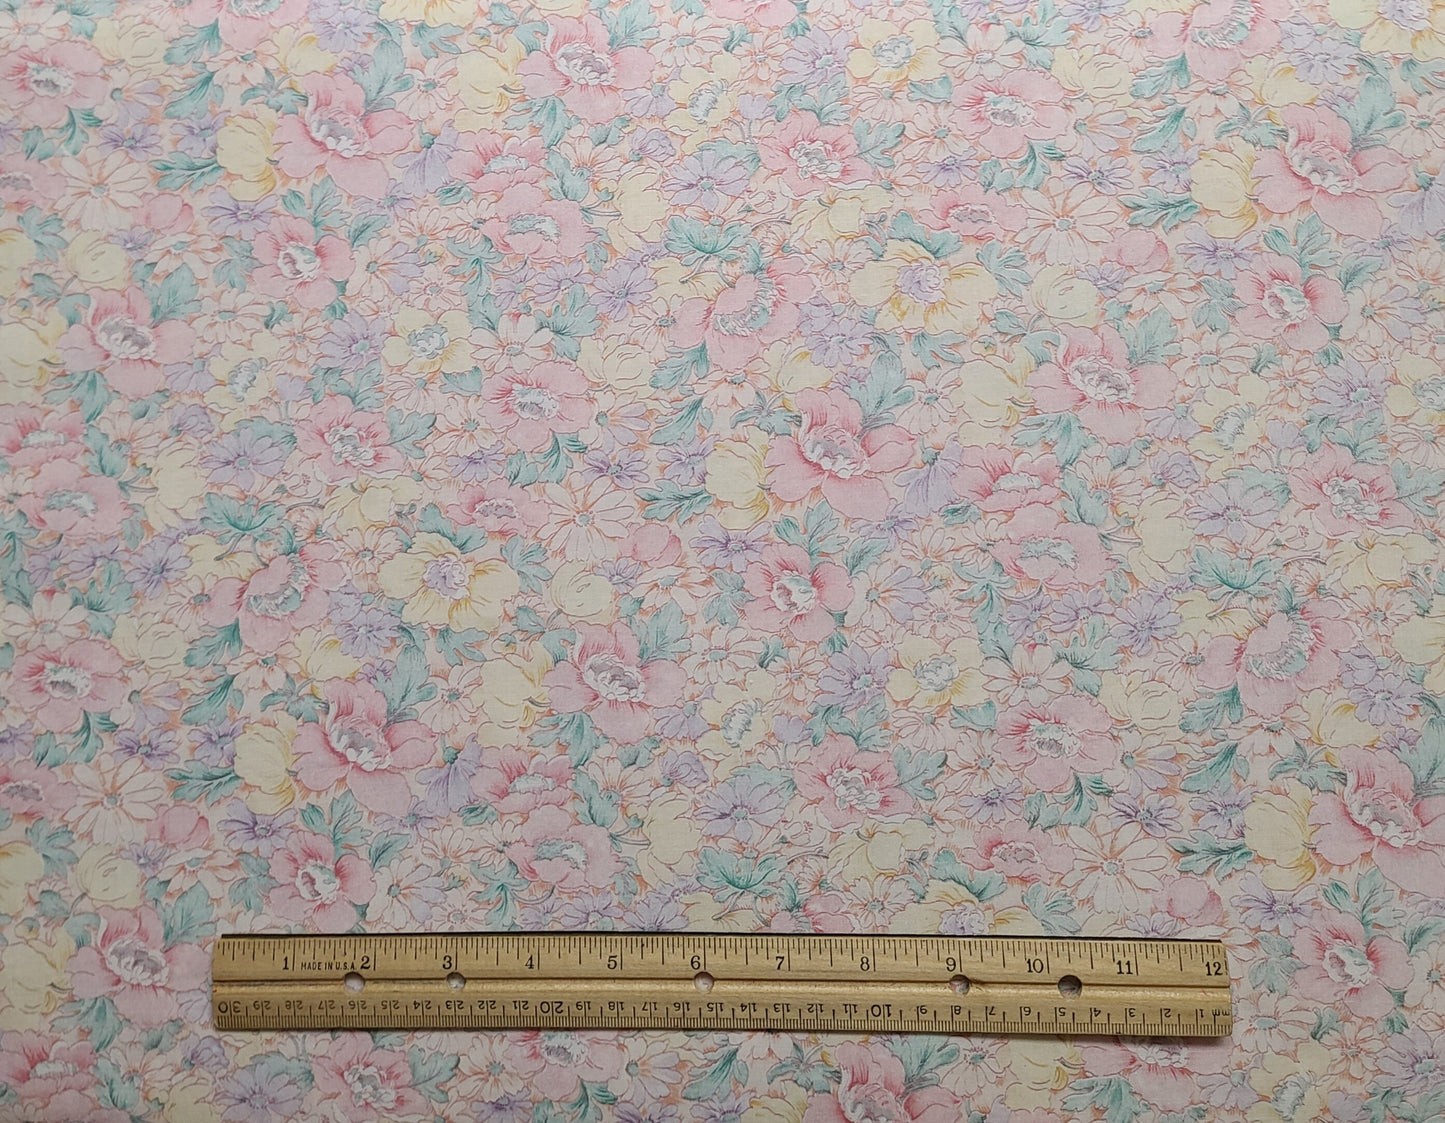 EOB - Pink, Yellow, Teal, Green and White Pastel Floral Print Fabric - Selvage to Selvage Print